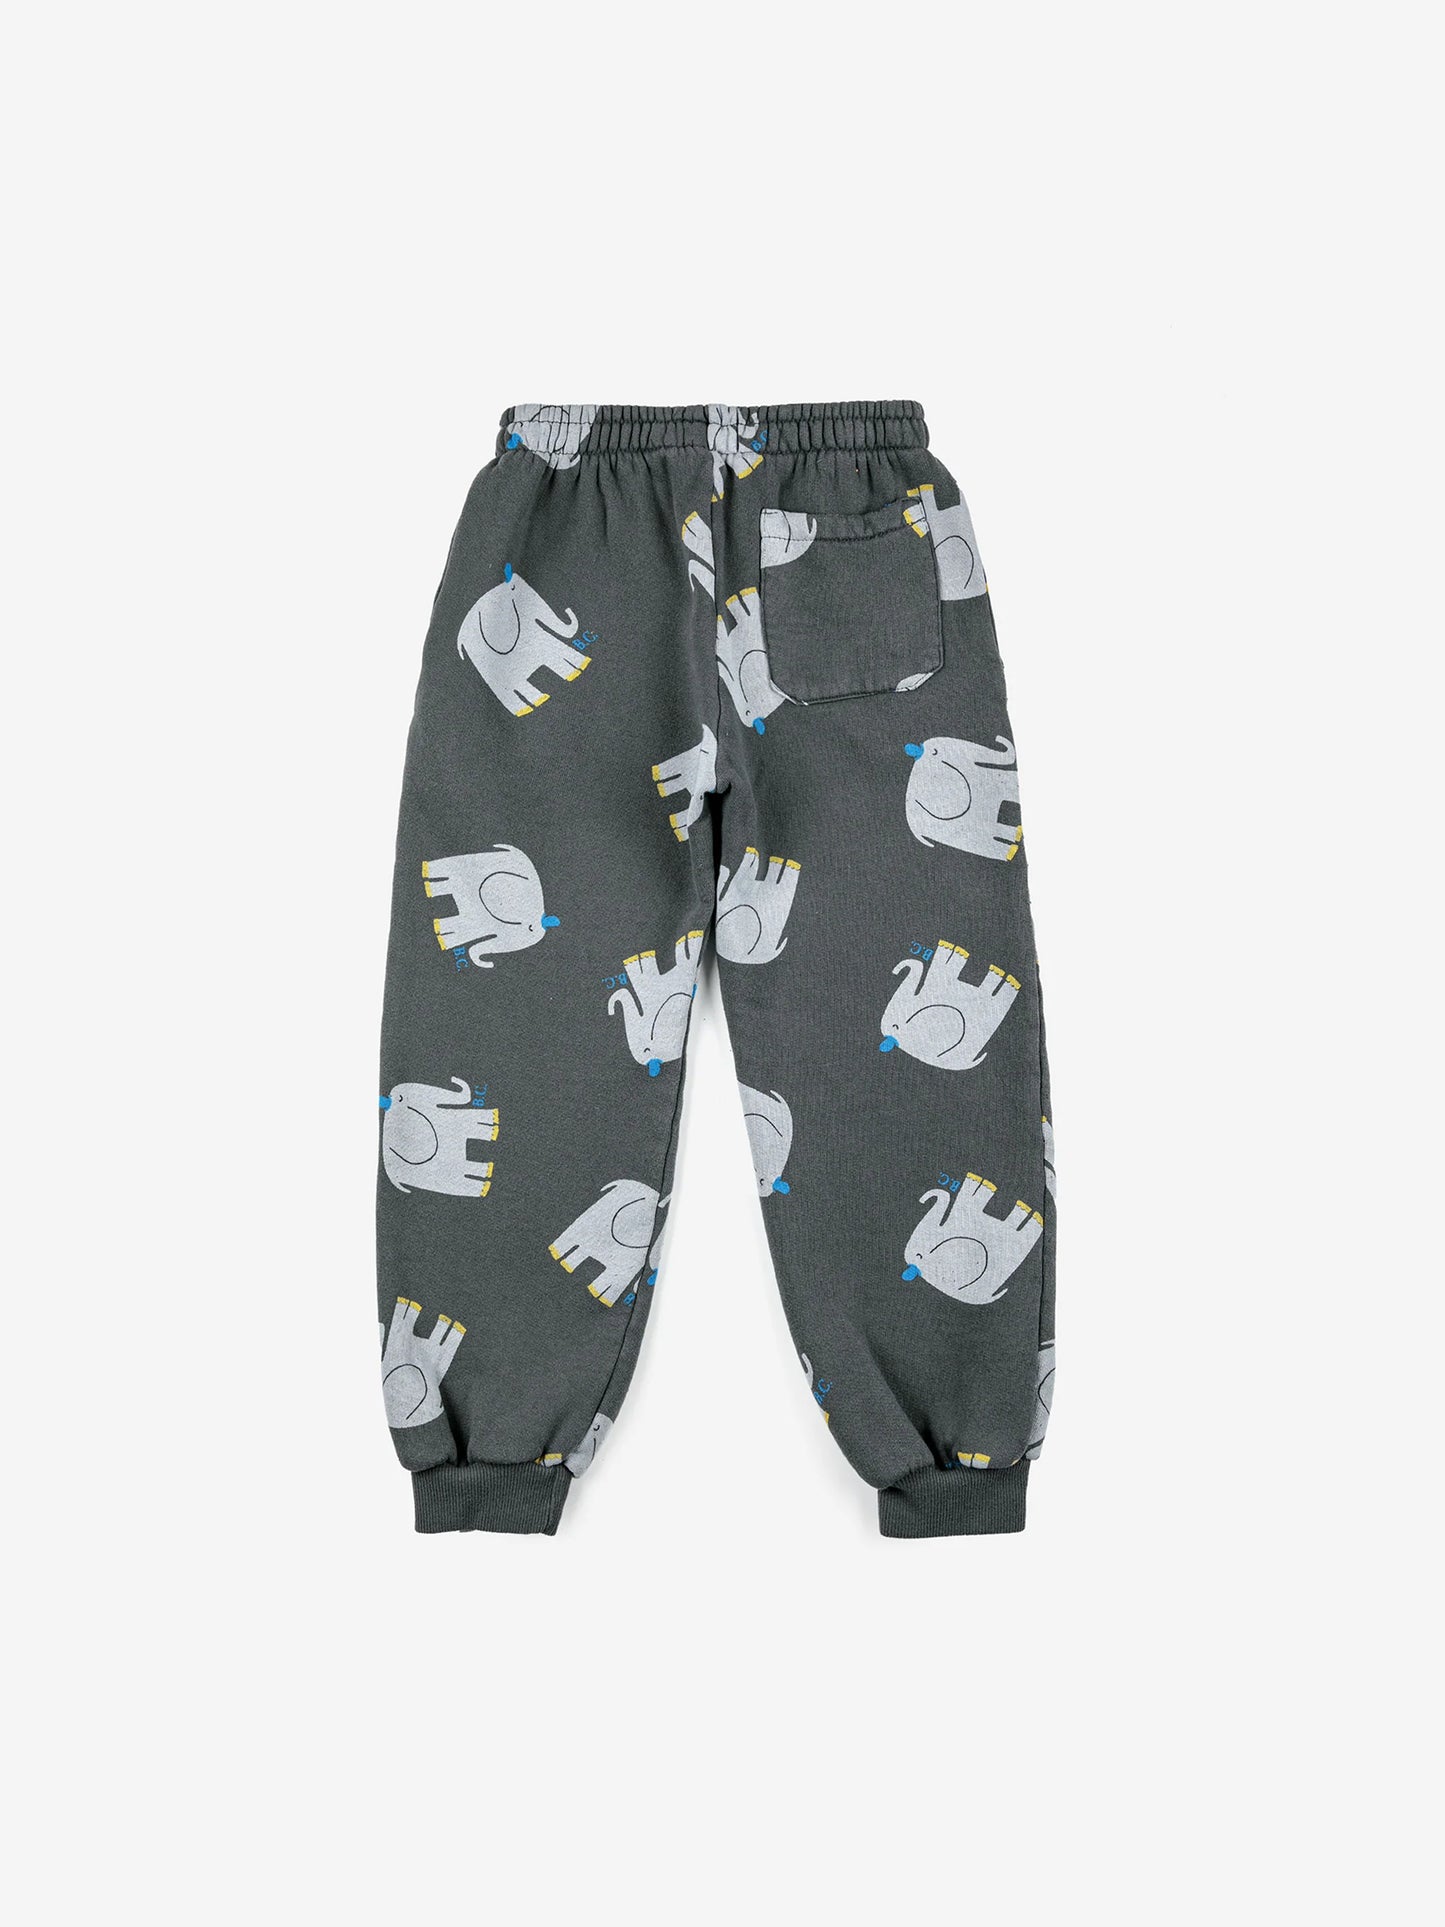 Bobo Choses The Elephant All Over Jogging Pants